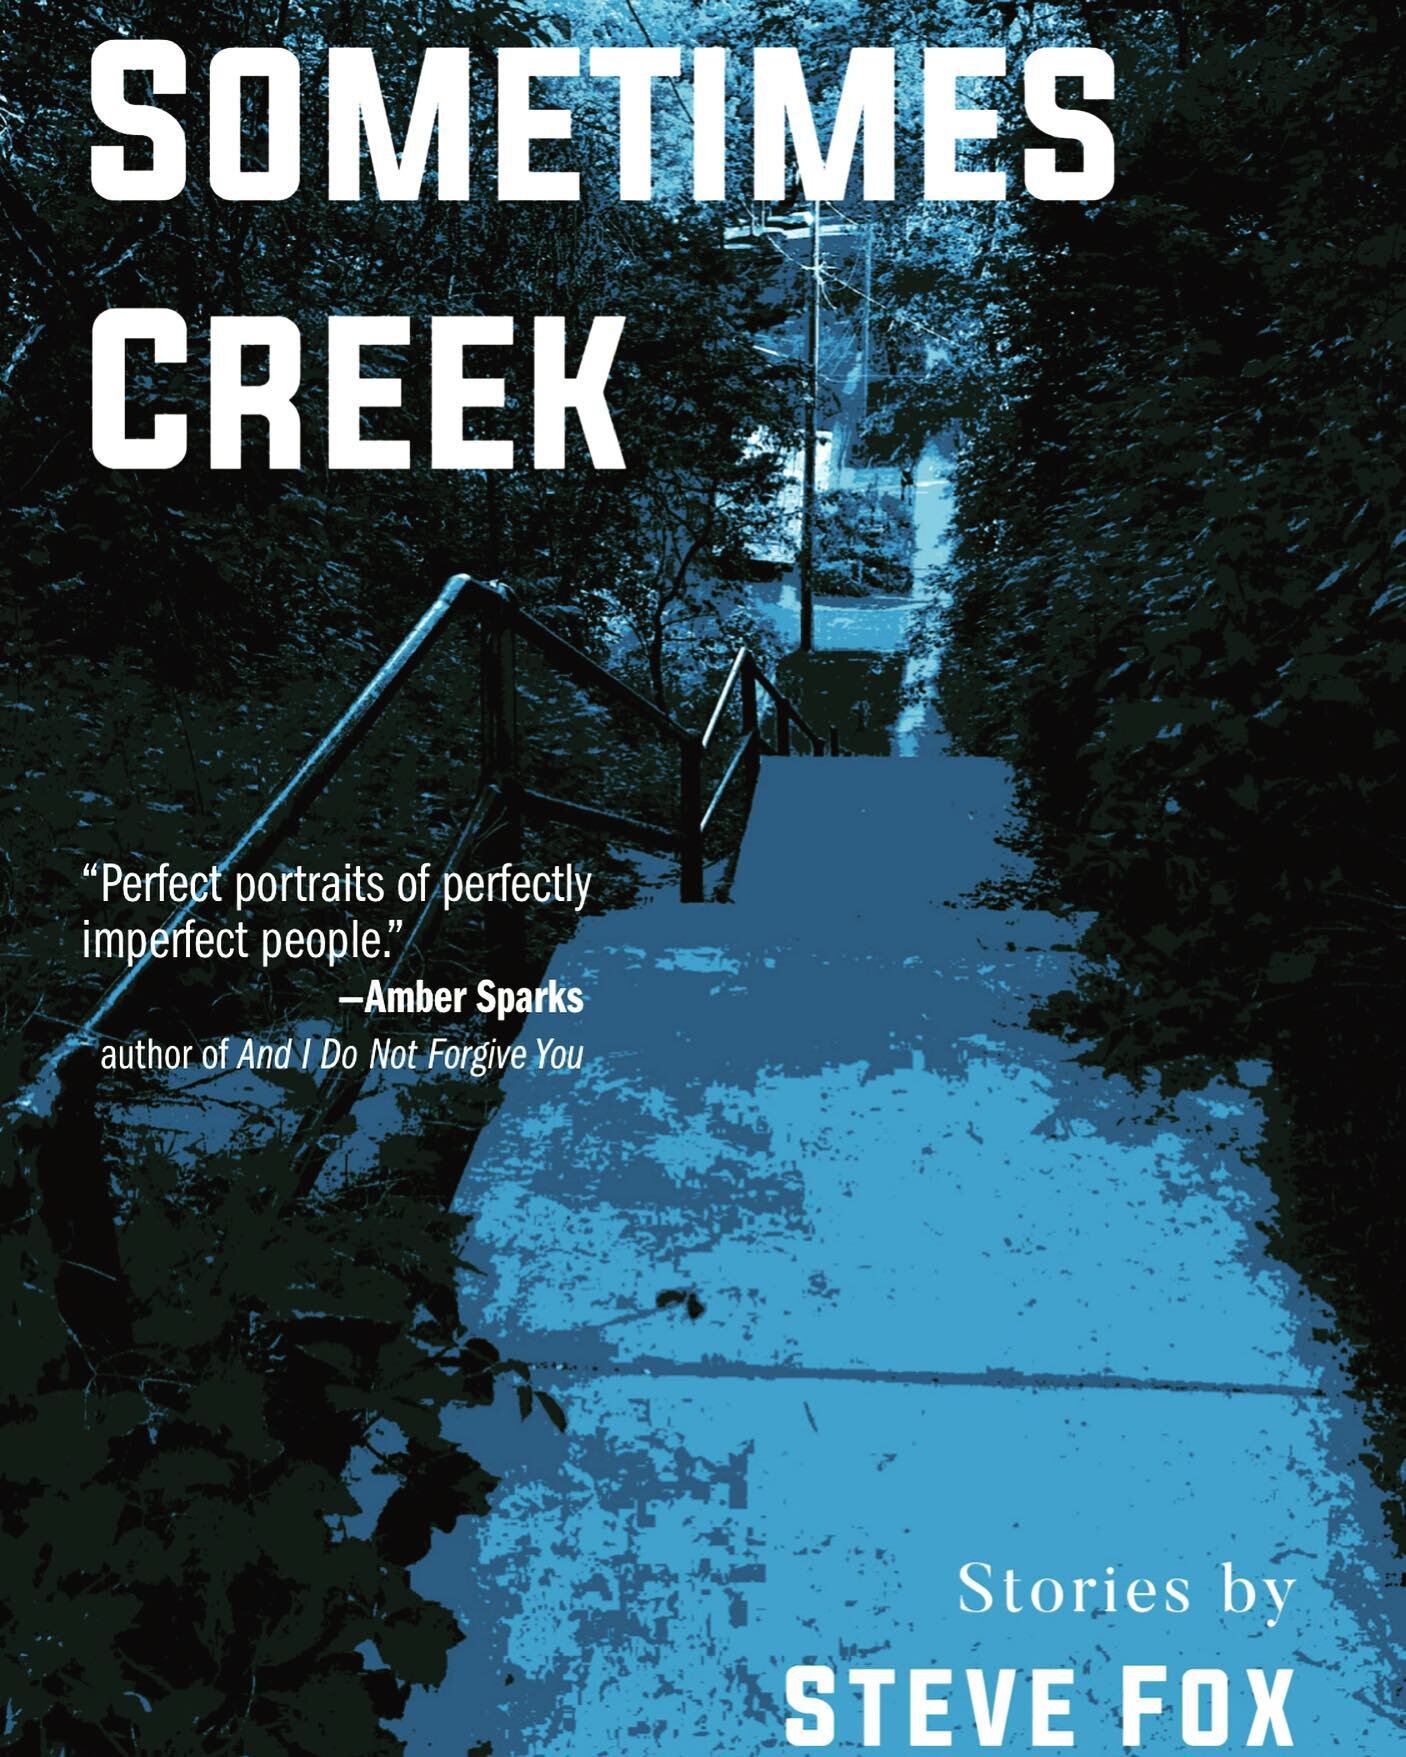 &ldquo;Haunted and unsettling, but somehow normal, Sometimes Creek is a virtuoso necromancy of people turned inside out and then folded back to a reality that we somehow recognize. Fox&rsquo;s world, gently strange and skewed on the page, is a place 